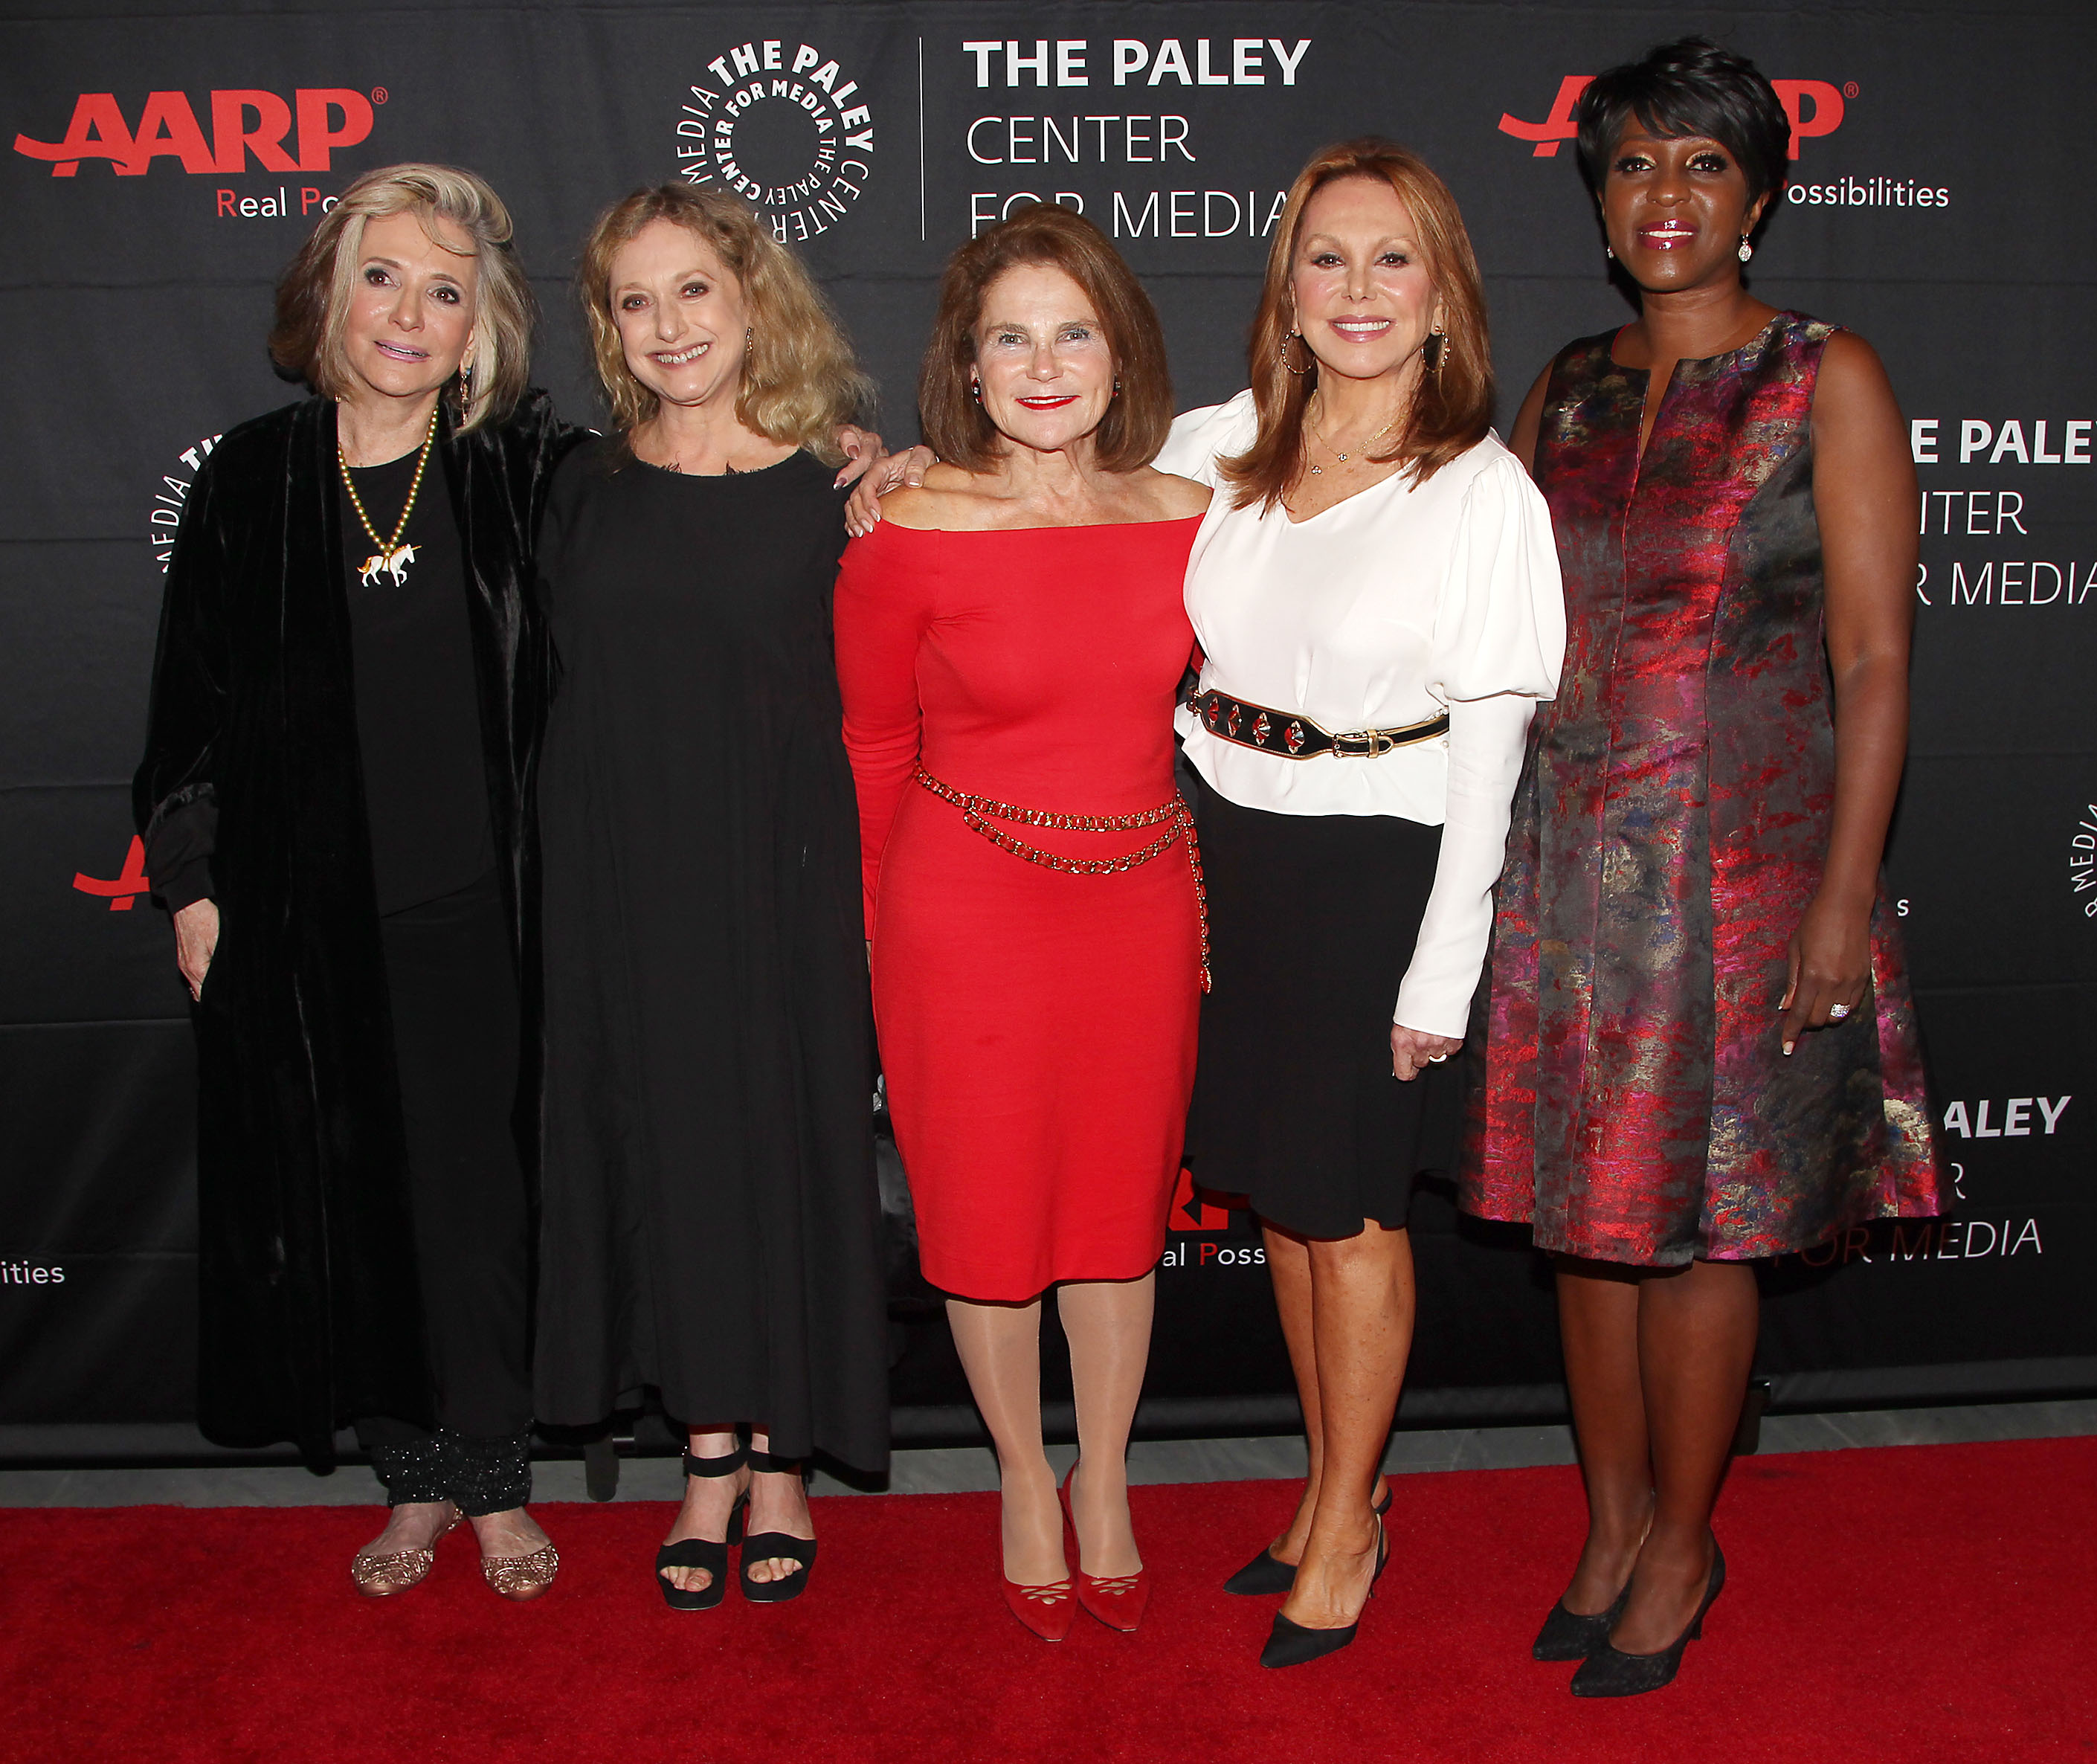 PaleyFest NY Presents - "BETTER THAN EVER - ACTRESSES FIGHTING AGEISM - AND WINNING"